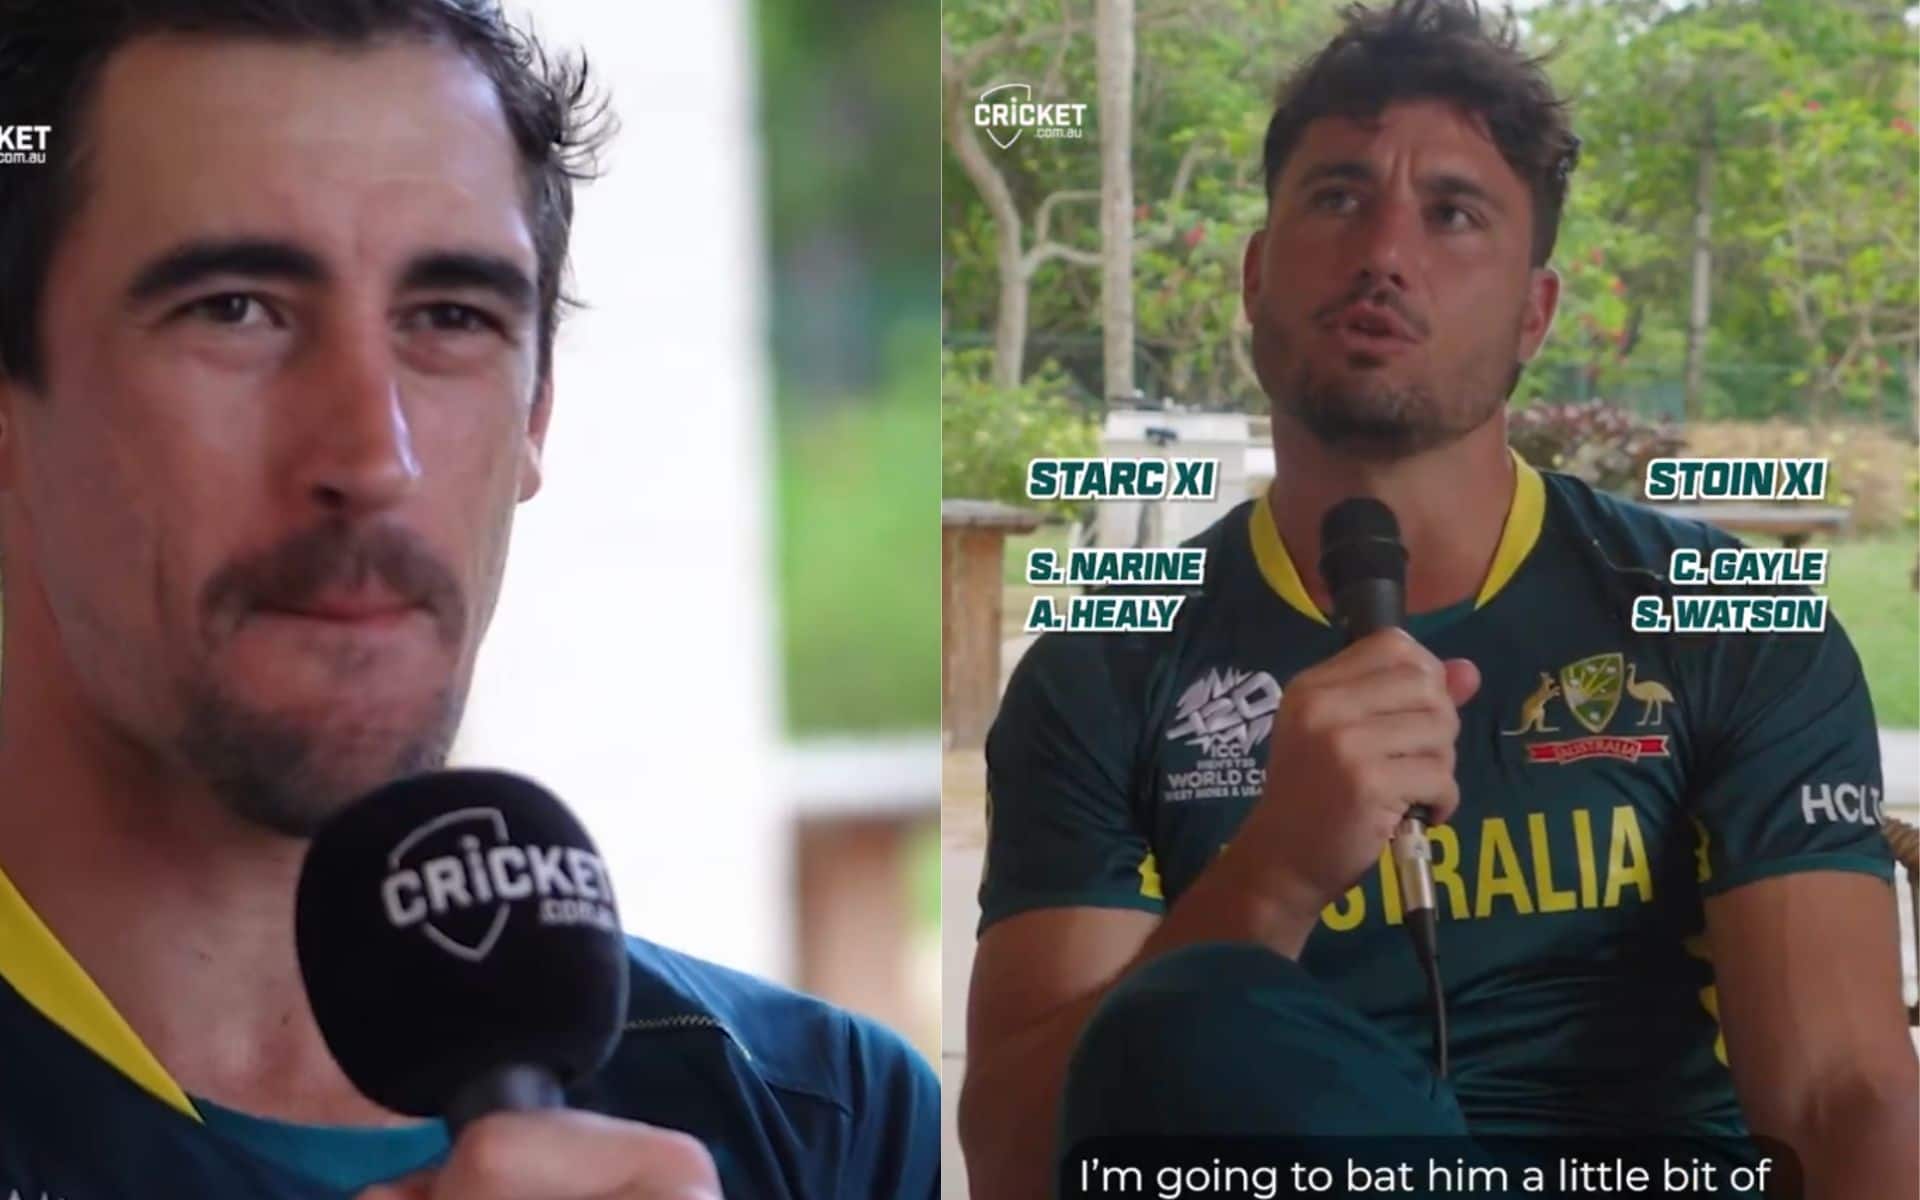 Snapshots of Mitchell Starc and Marcus Stoinis from the video (X.com)